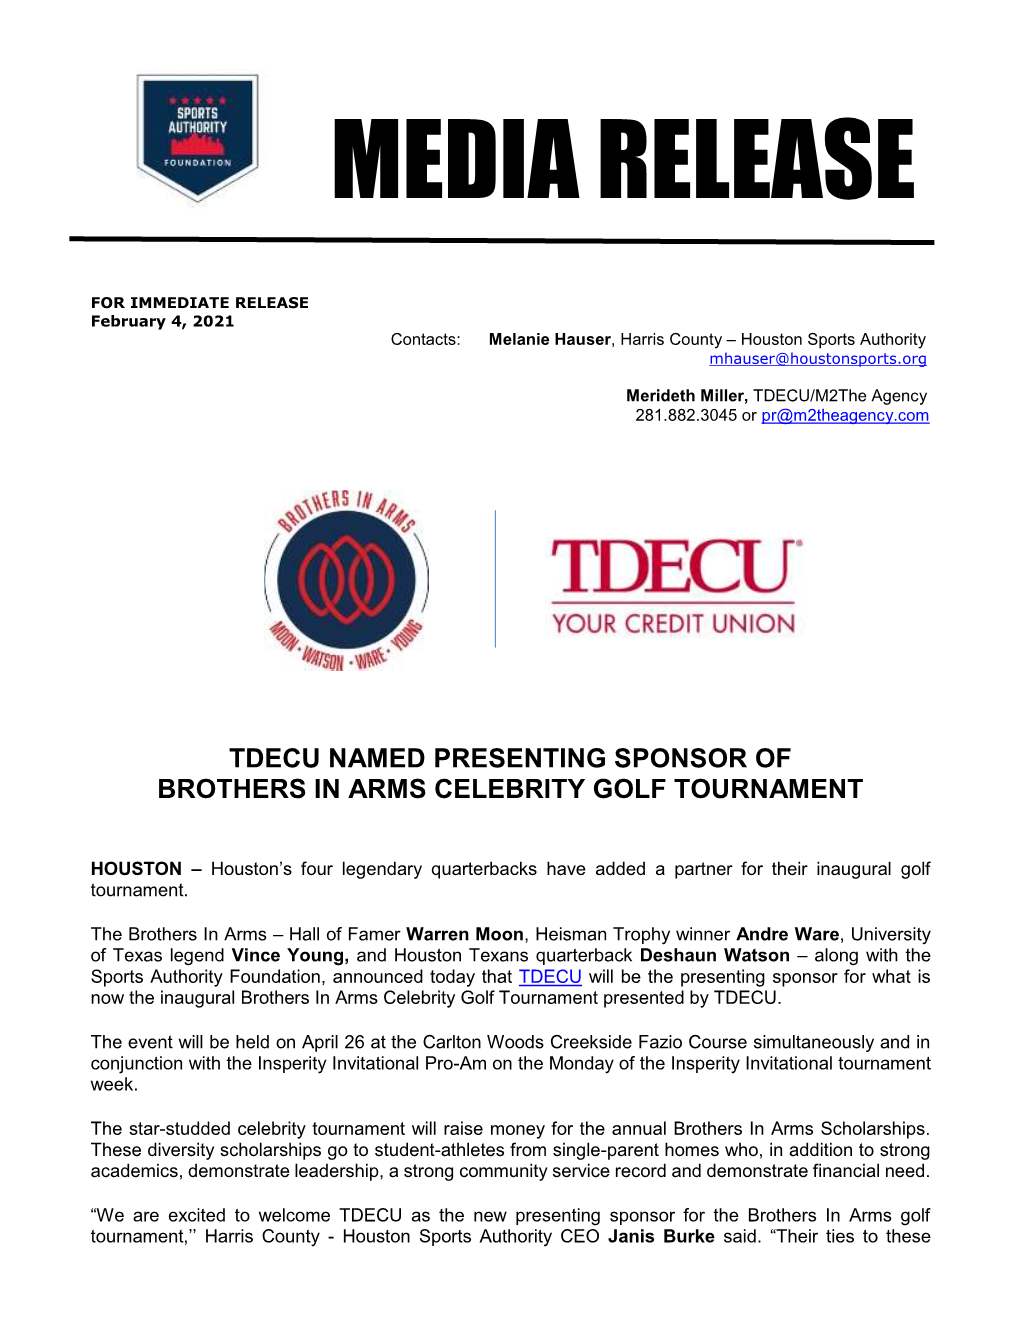 Tdecu Named Presenting Sponsor of Brothers in Arms Celebrity Golf Tournament